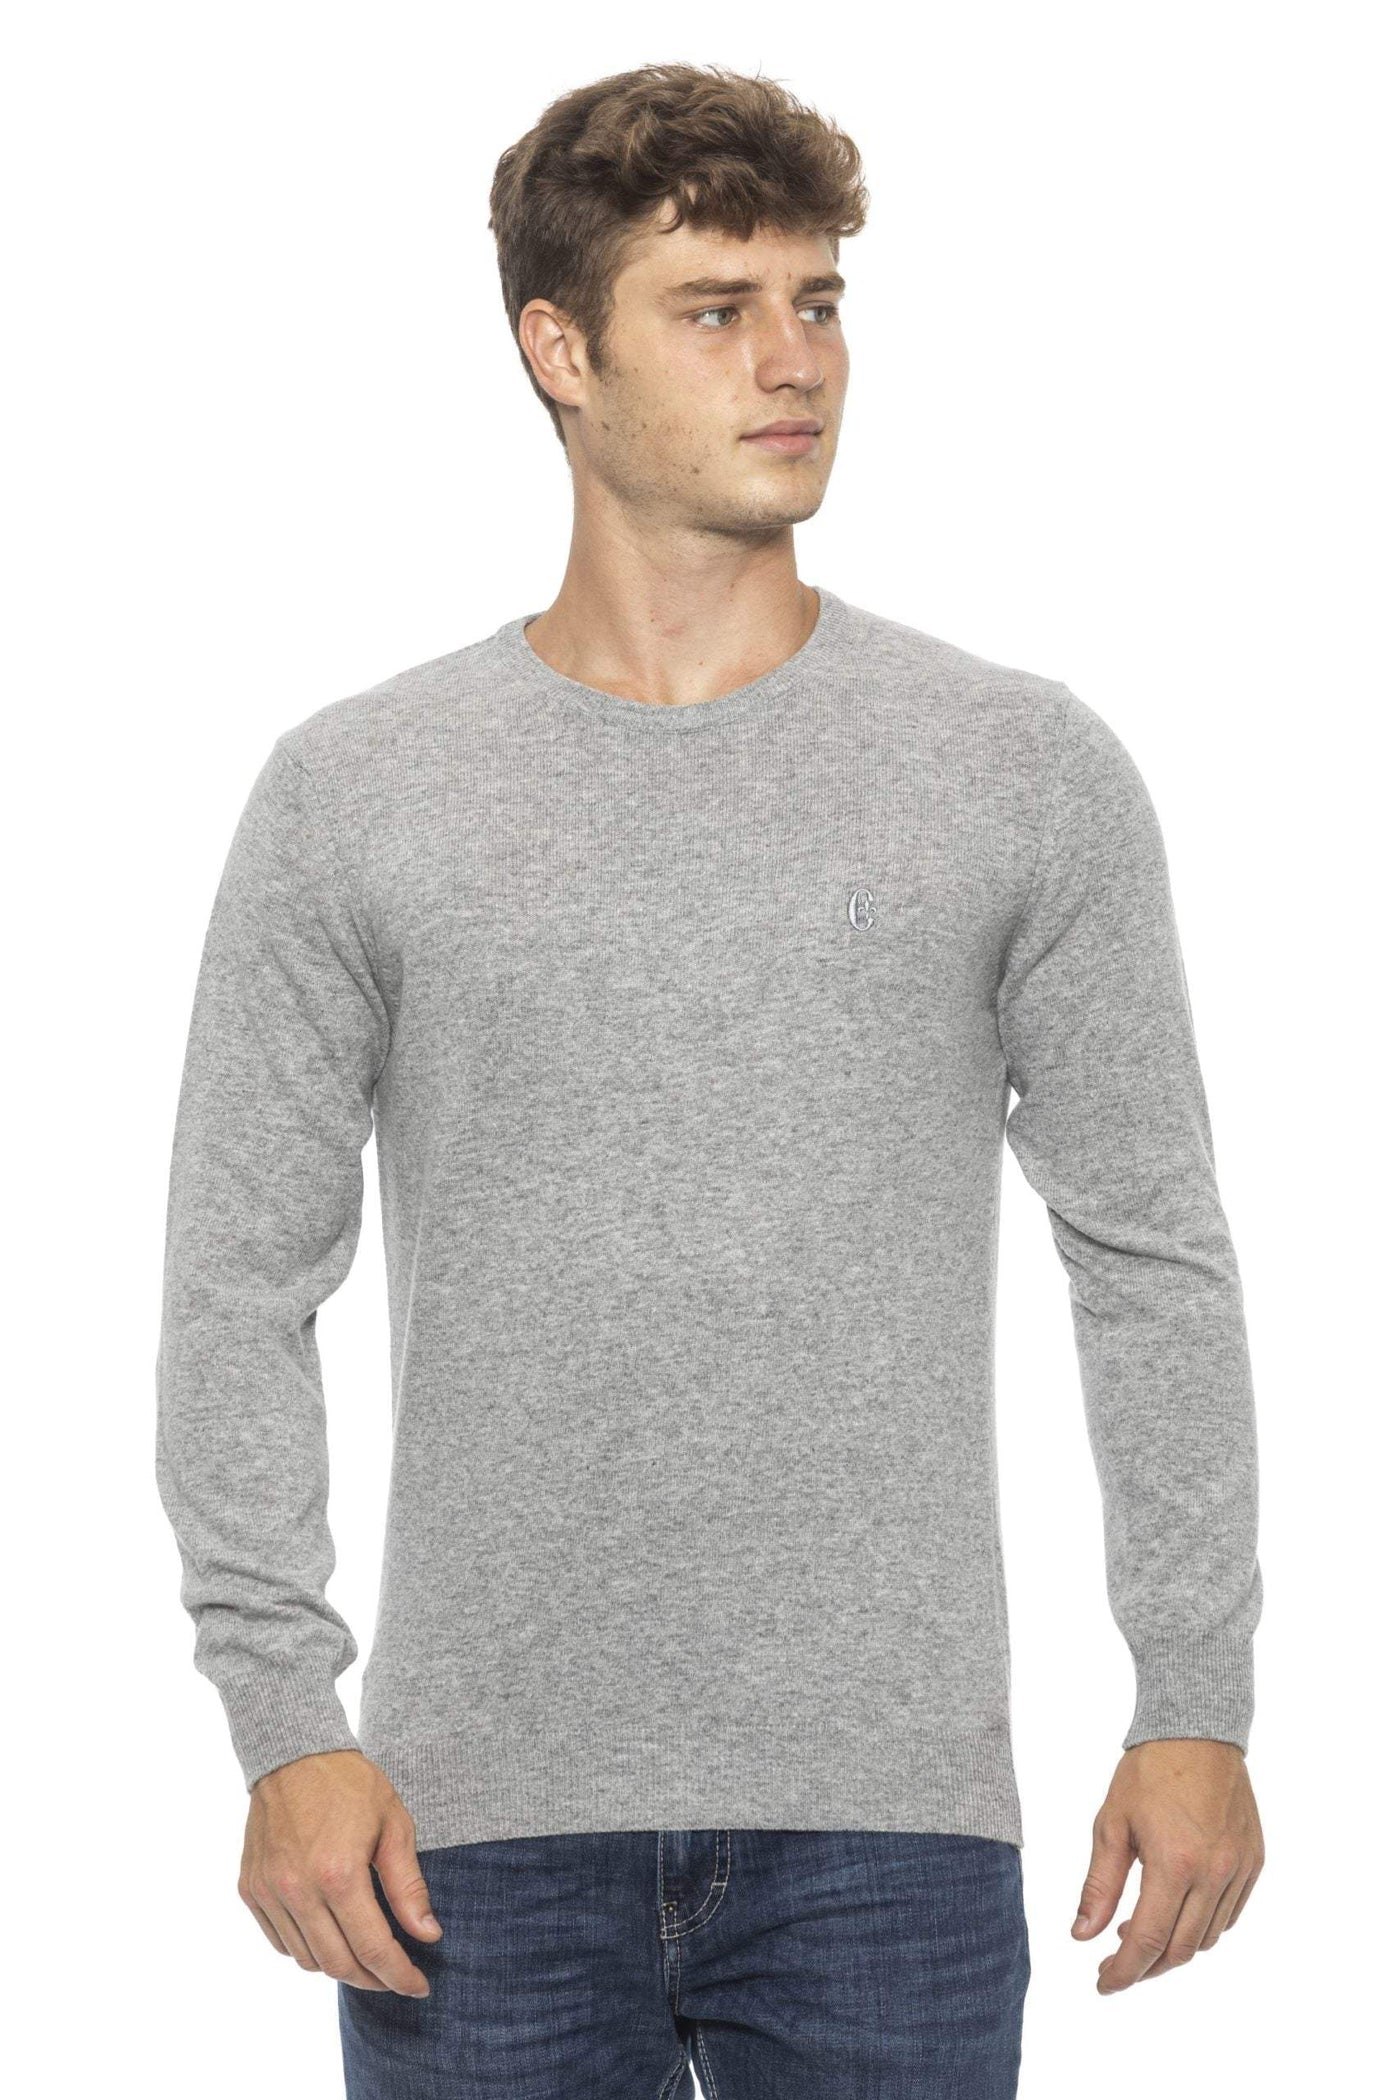 Conte of Florence crew neck  Solid color Sweater #men, Conte of Florence, feed-agegroup-adult, feed-color-Silver, feed-gender-male, L, M, Silver, Sweaters - Men - Clothing, XL, XXL at SEYMAYKA